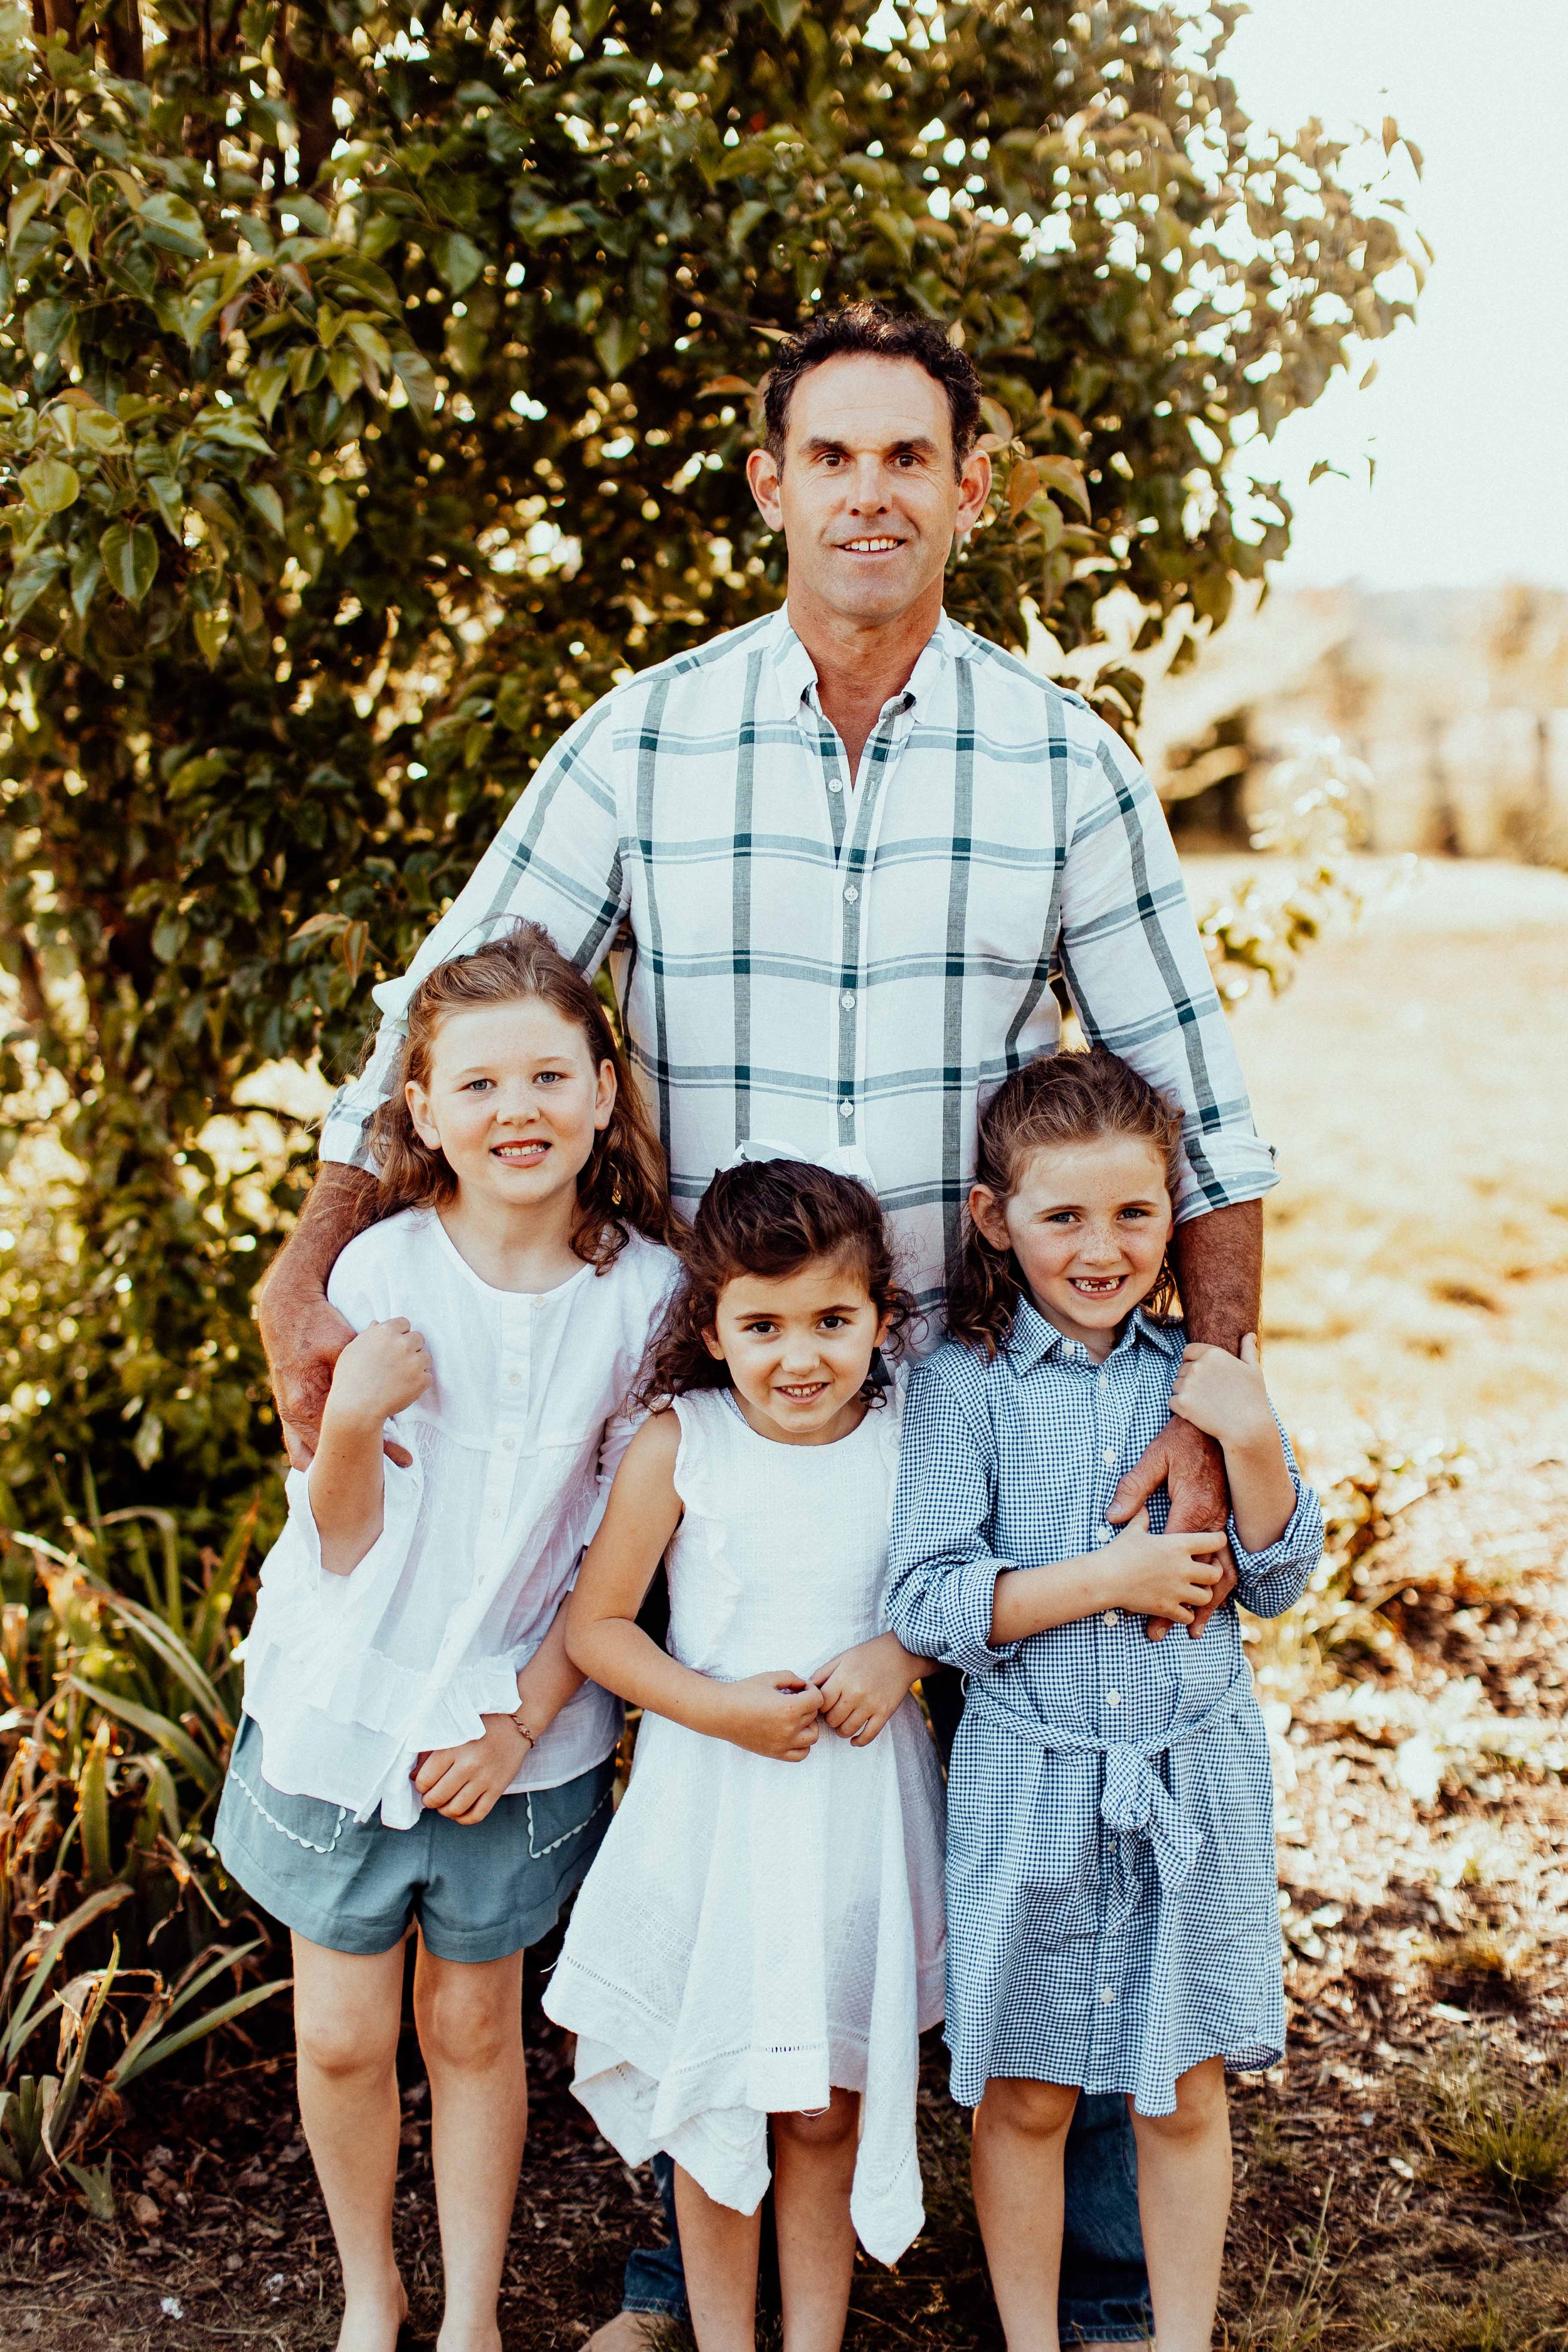 carroll-family-exeter-southern-hoghlands-inhome-family-lifestyle-wollondilly-camden-macarthur-sydney-photography-www.emilyobrienphotography.net-26.jpg